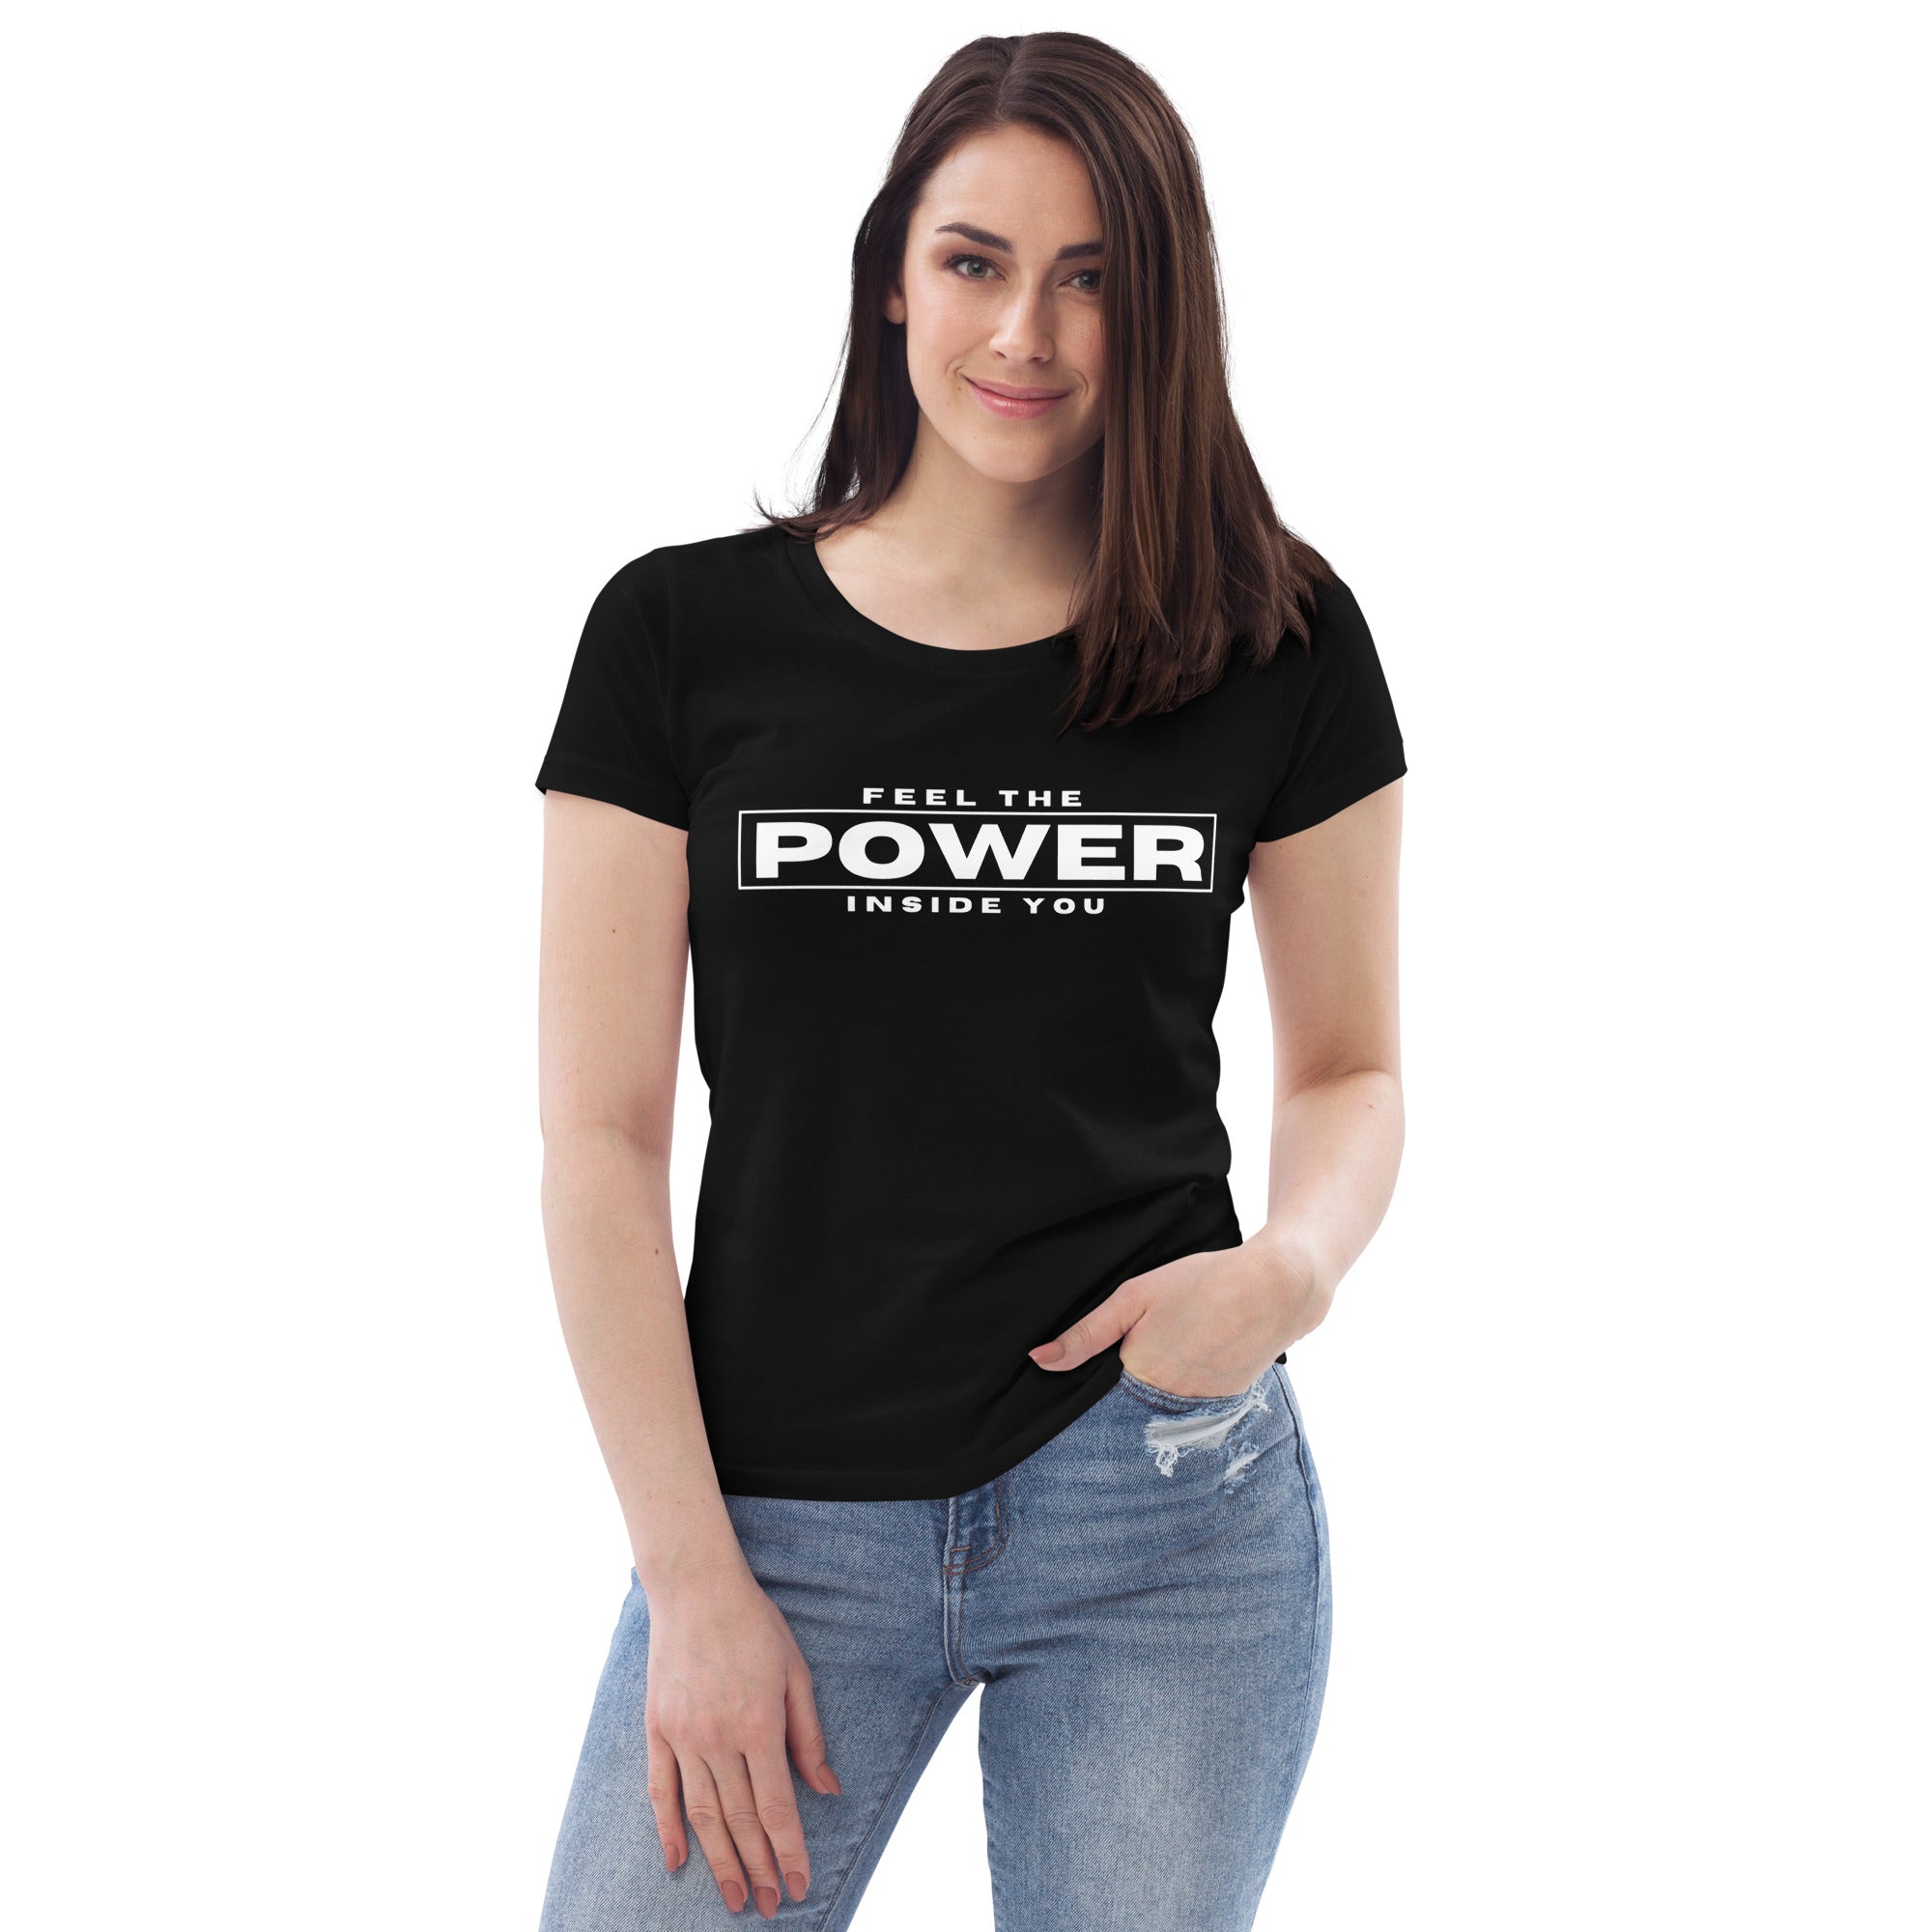 The Power Inside you Women's Fitted eco T-Shirt